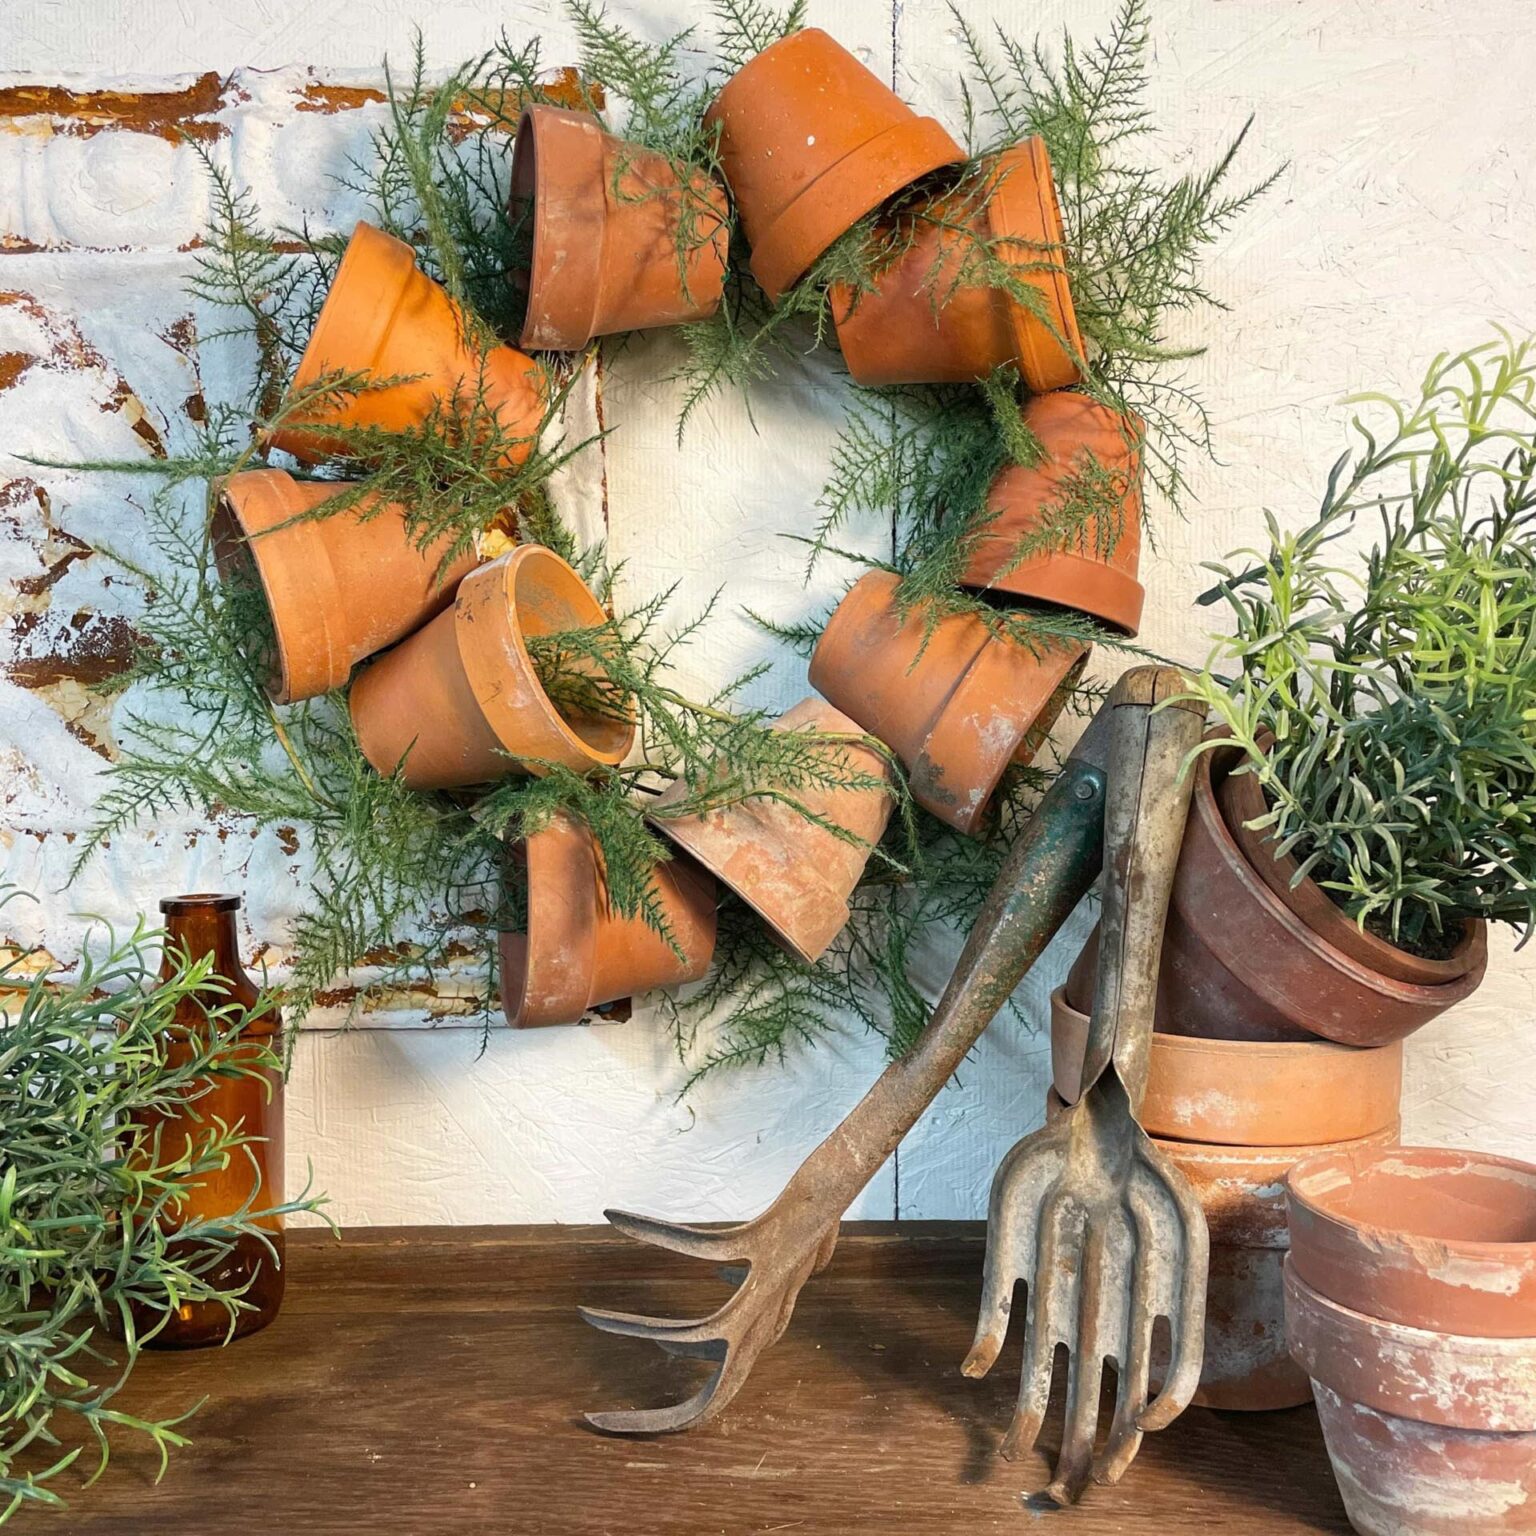 https://thejunkparlor.com/wp-content/uploads/2021/07/Terracotta-Wreath-Junk-Parlor-scaled-1-1536x1536.jpeg